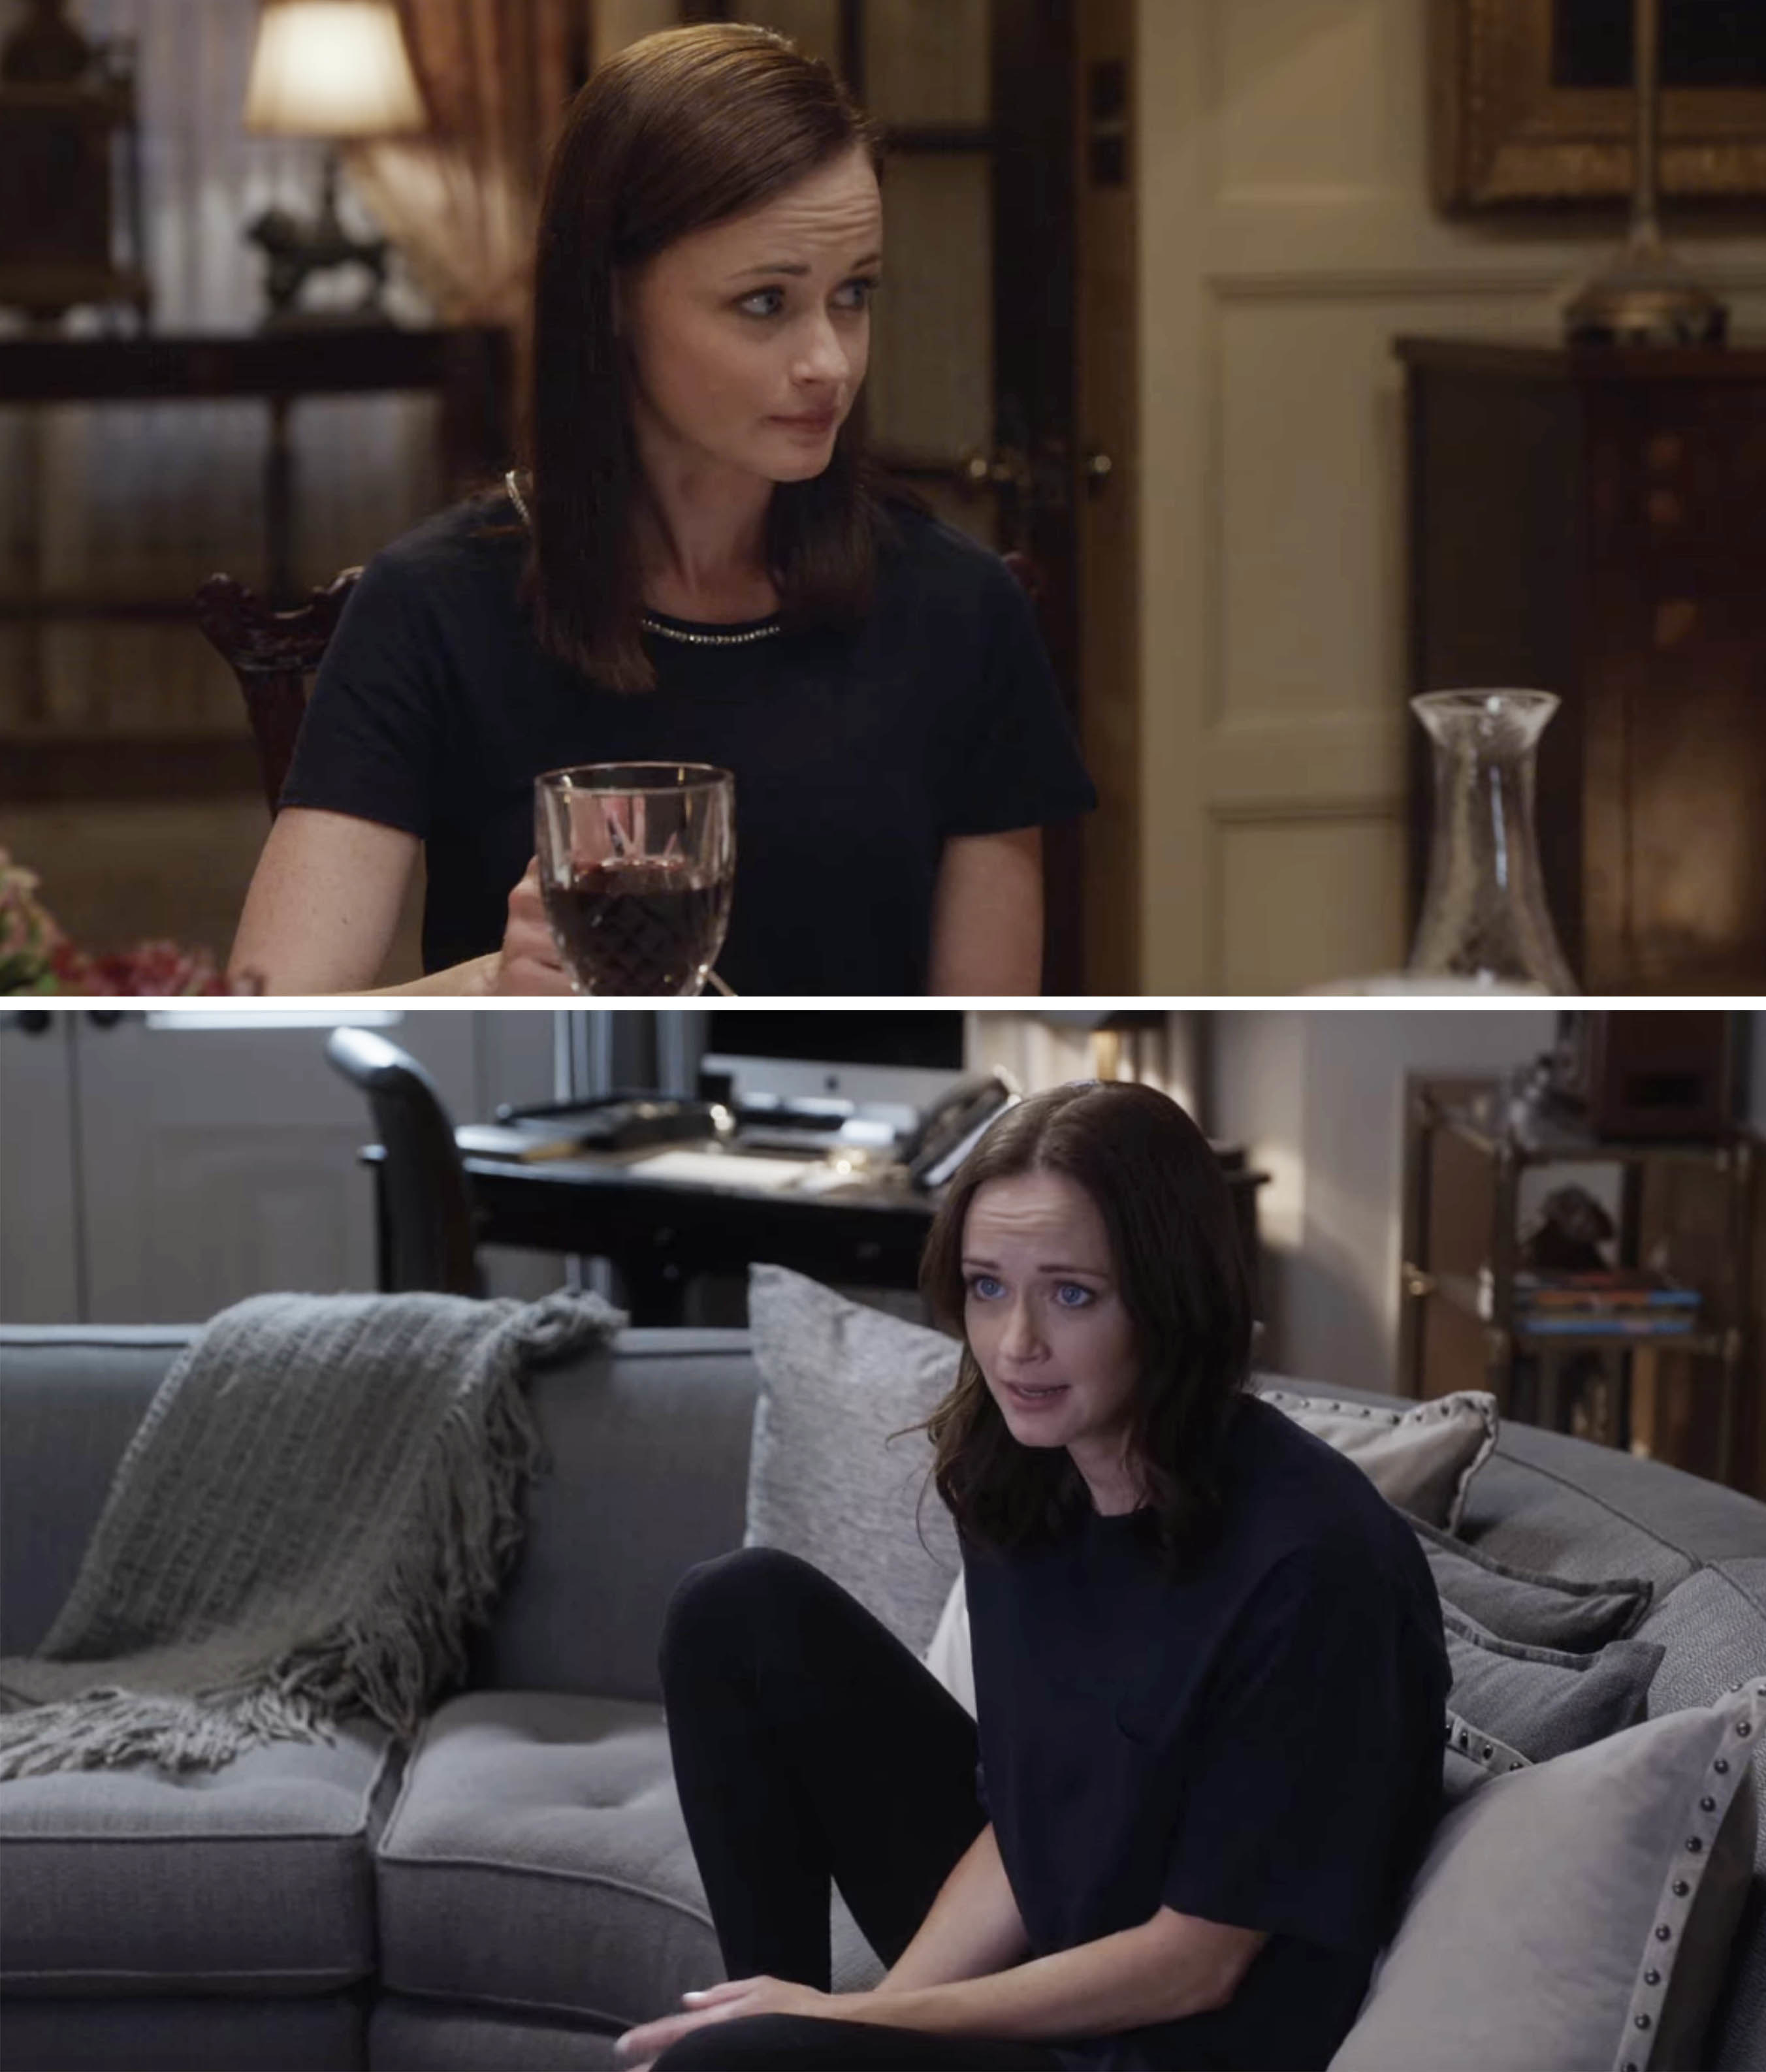 Rory at a dinner table and then sitting on a couch